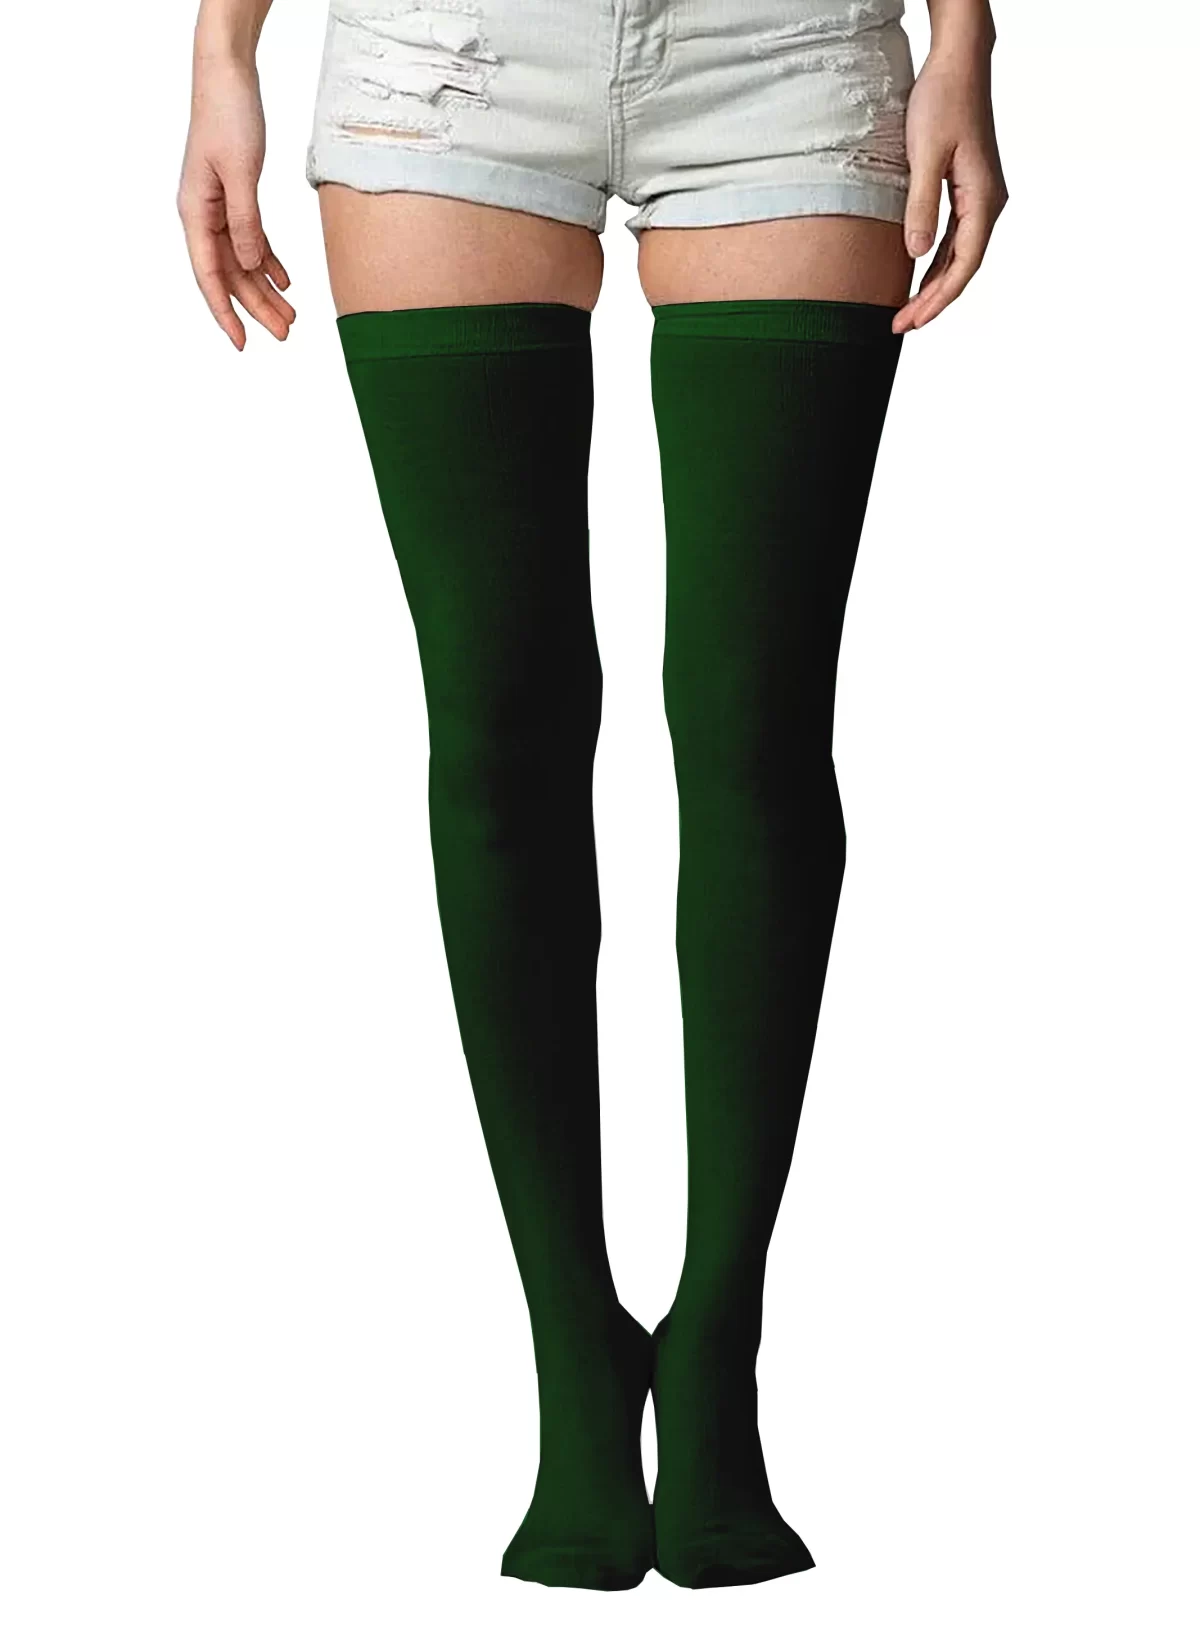 Green Girls and Women's Thigh High Socks ( Free Size )3